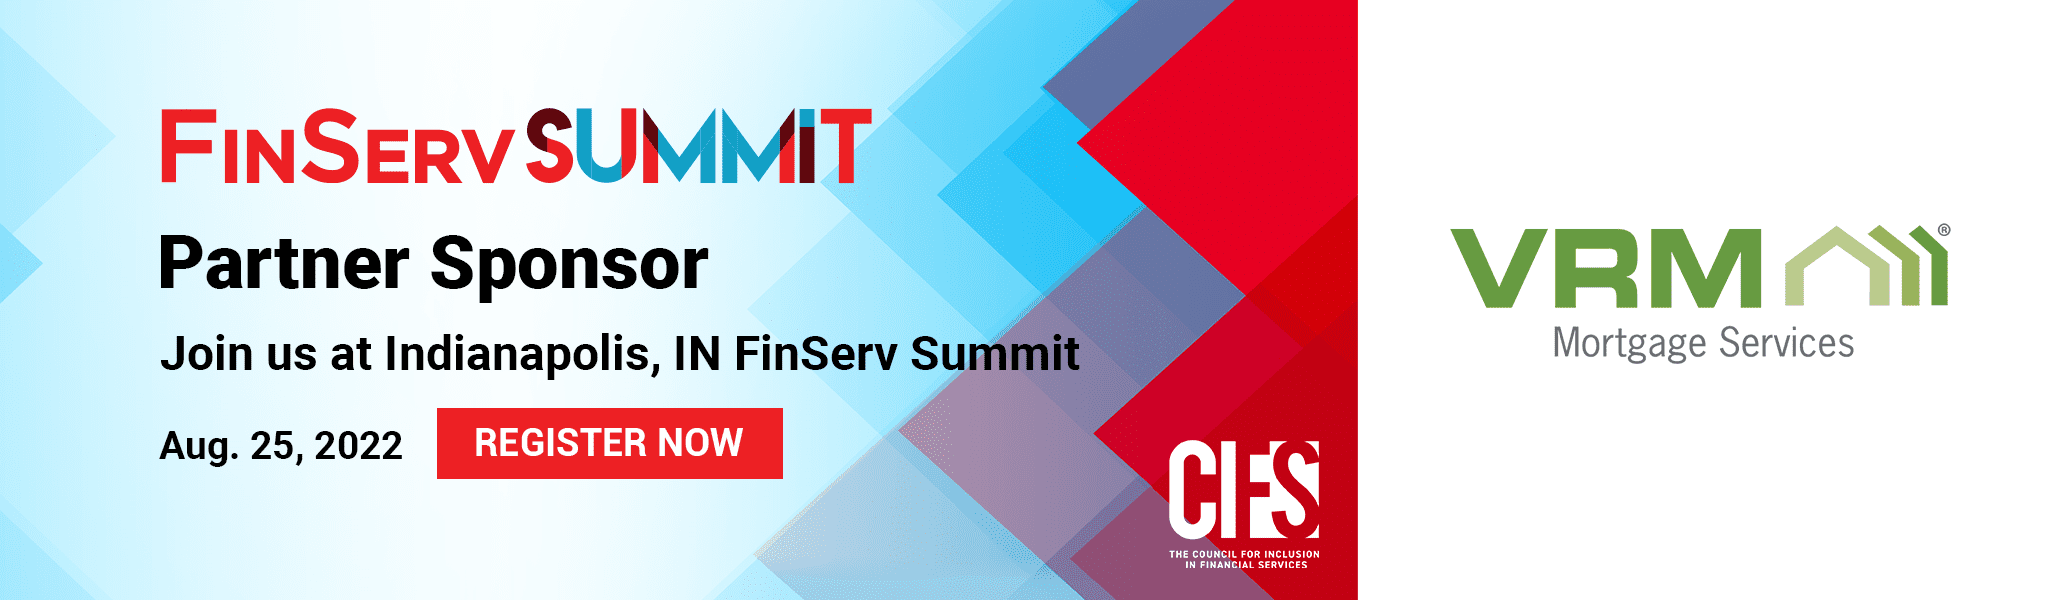 Partner Sponsor - CIFS Finserv Summit Indianapolis, IN | REO Asset Management | VRM Mortgage Services